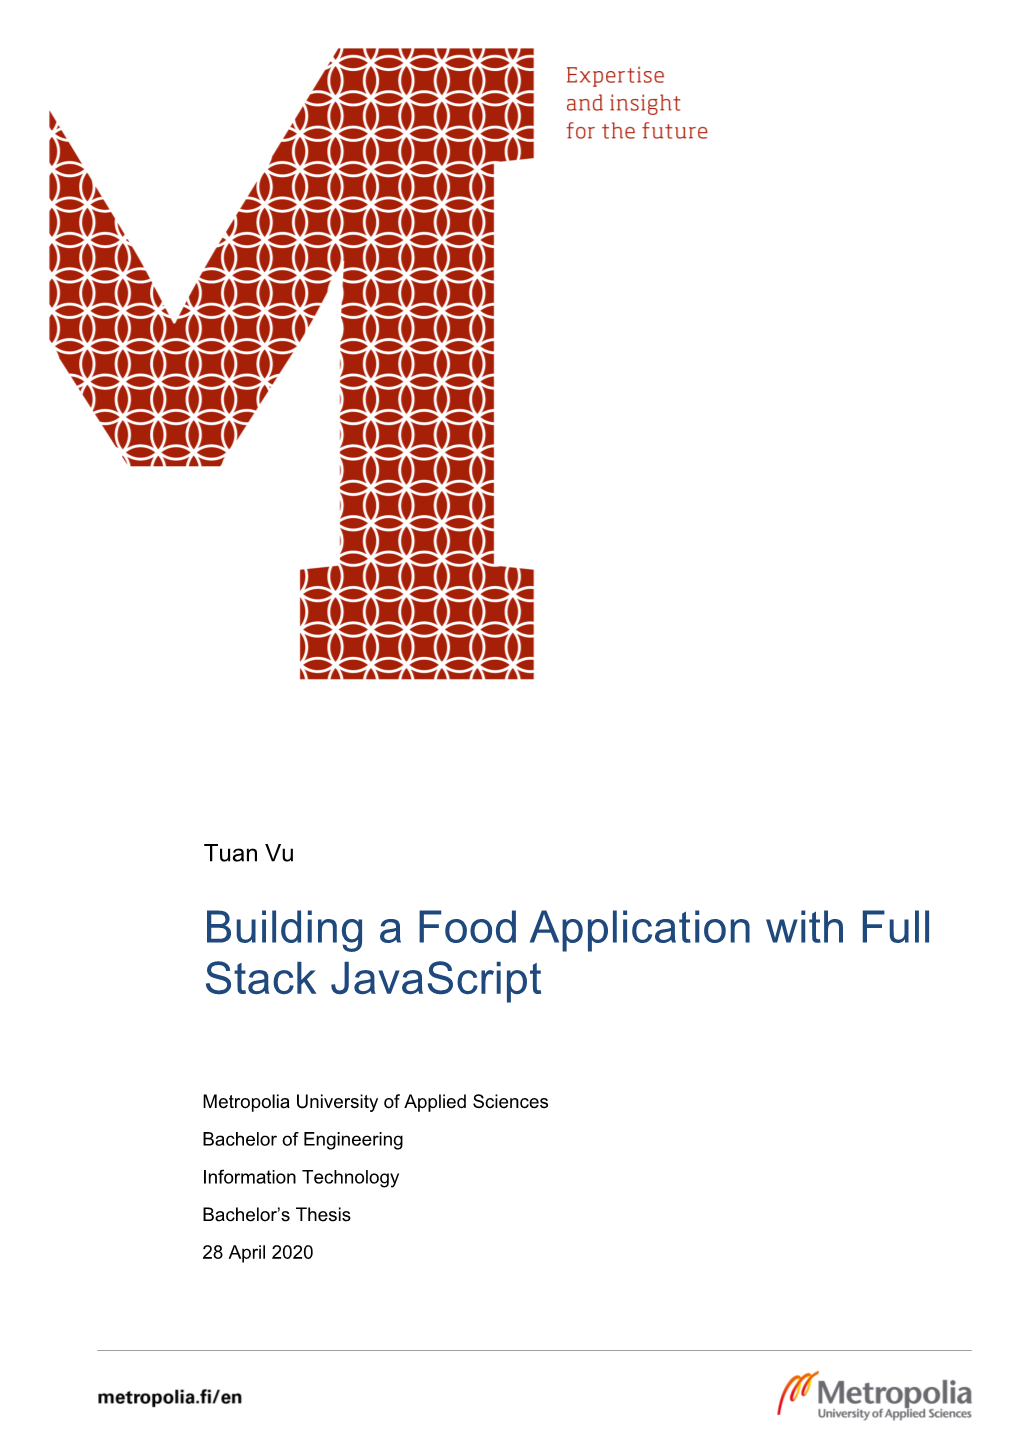 Building a Food Application with Full Stack Javascript